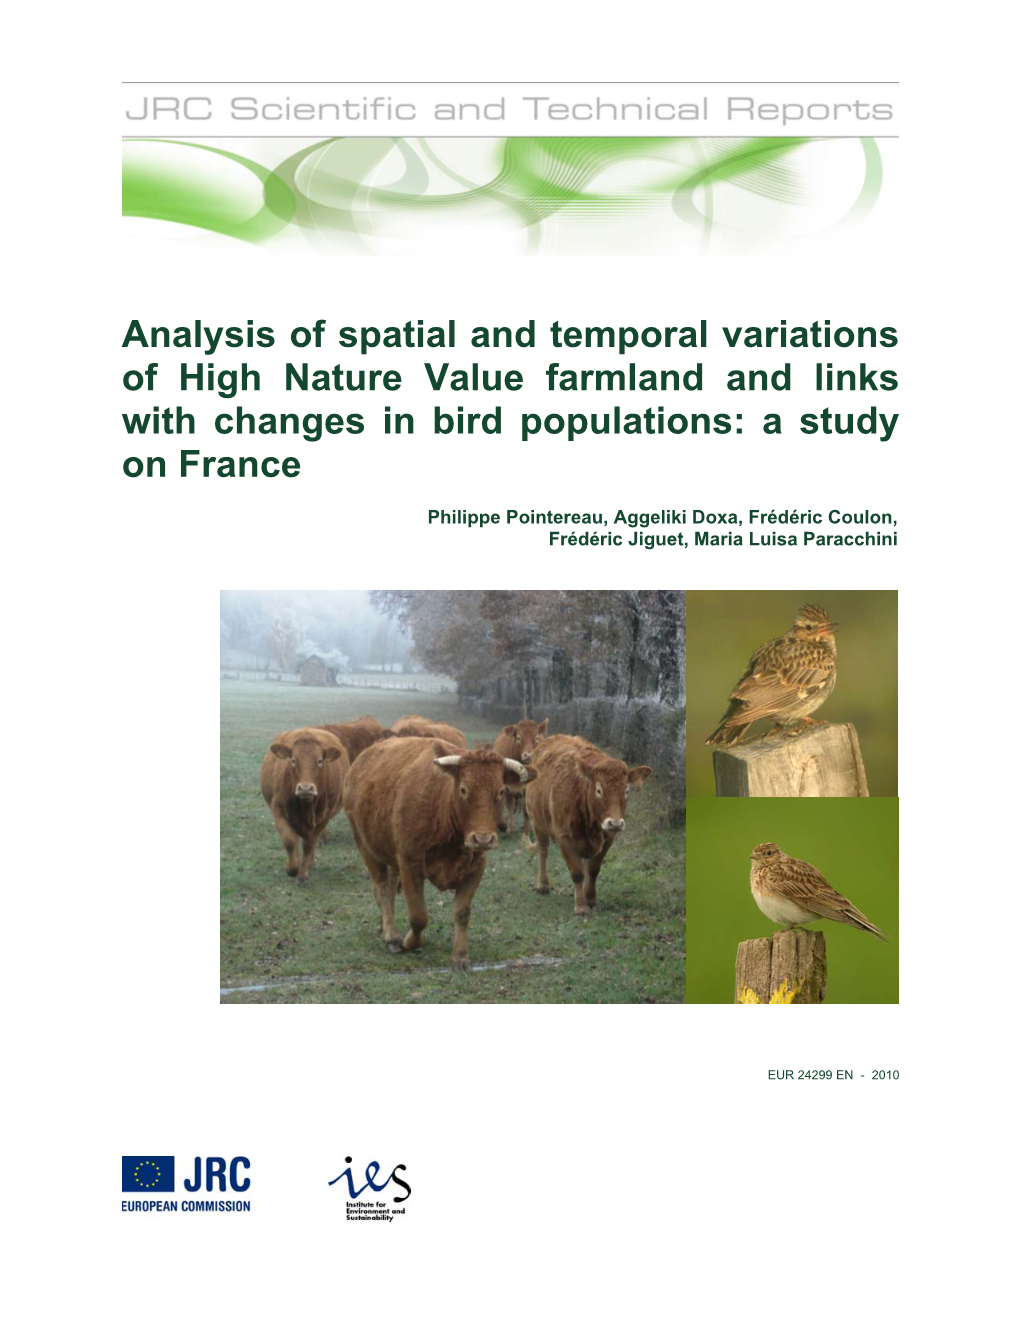 Analysis of Spatial and Temporal Variations of High Nature Value Farmland and Links with Changes in Bird Populations: a Study on France